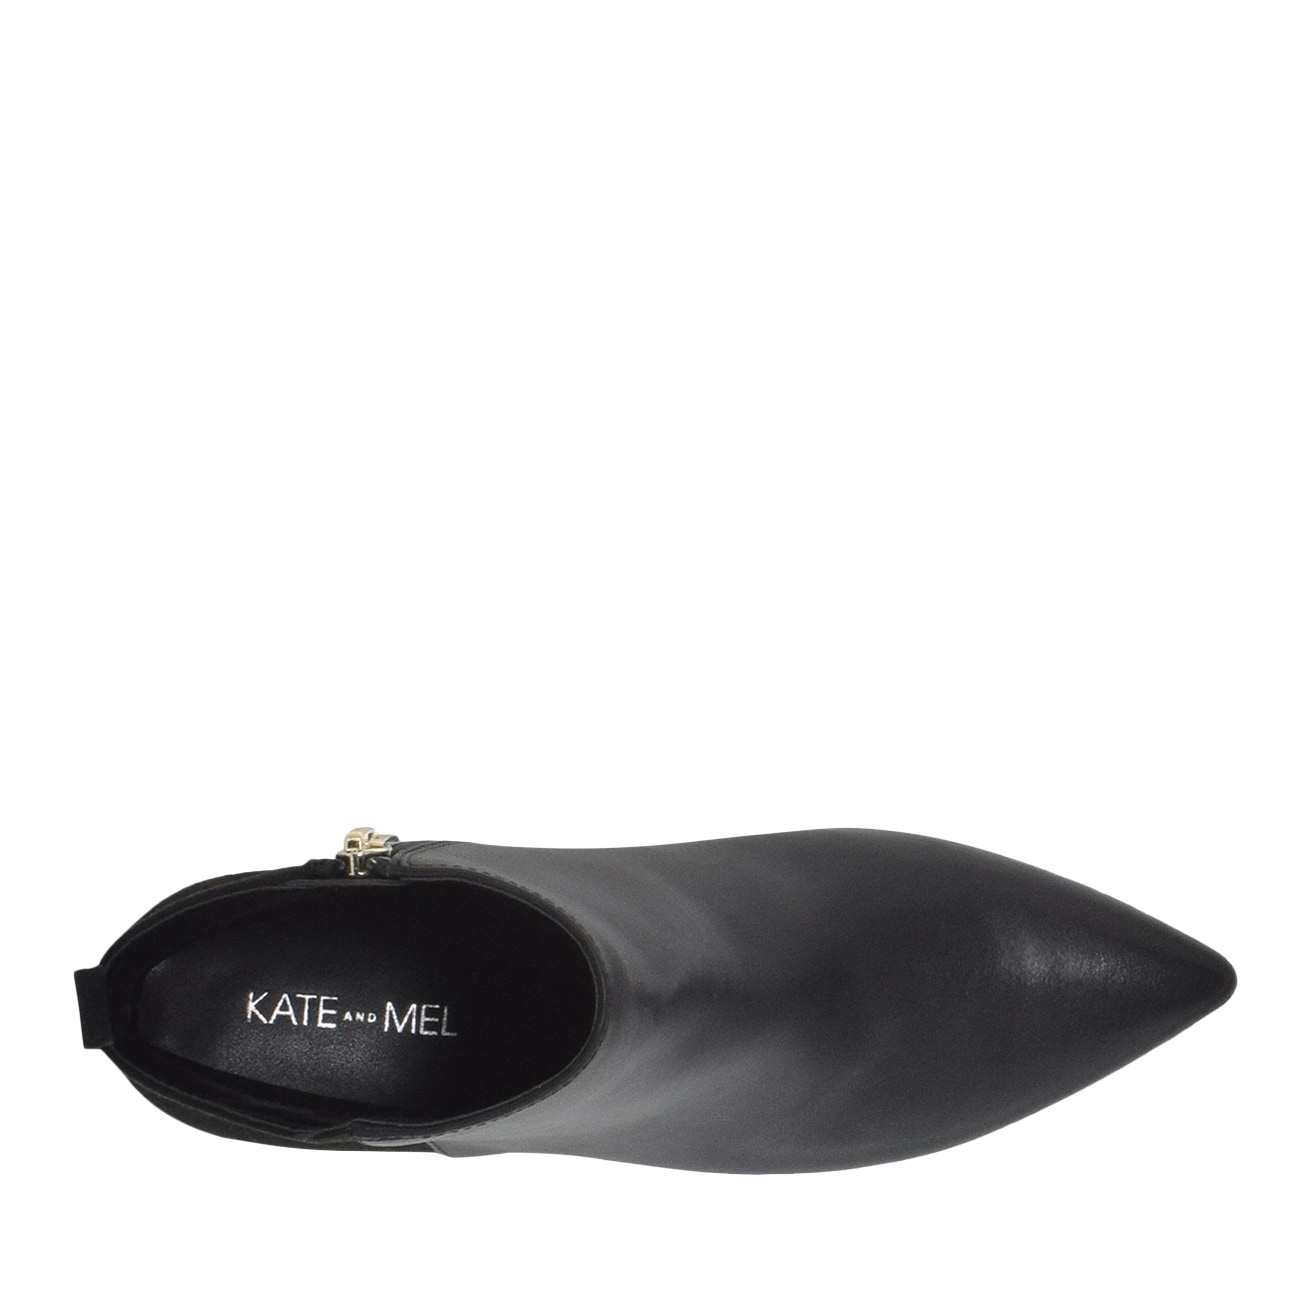 kate and mel chelsea boots